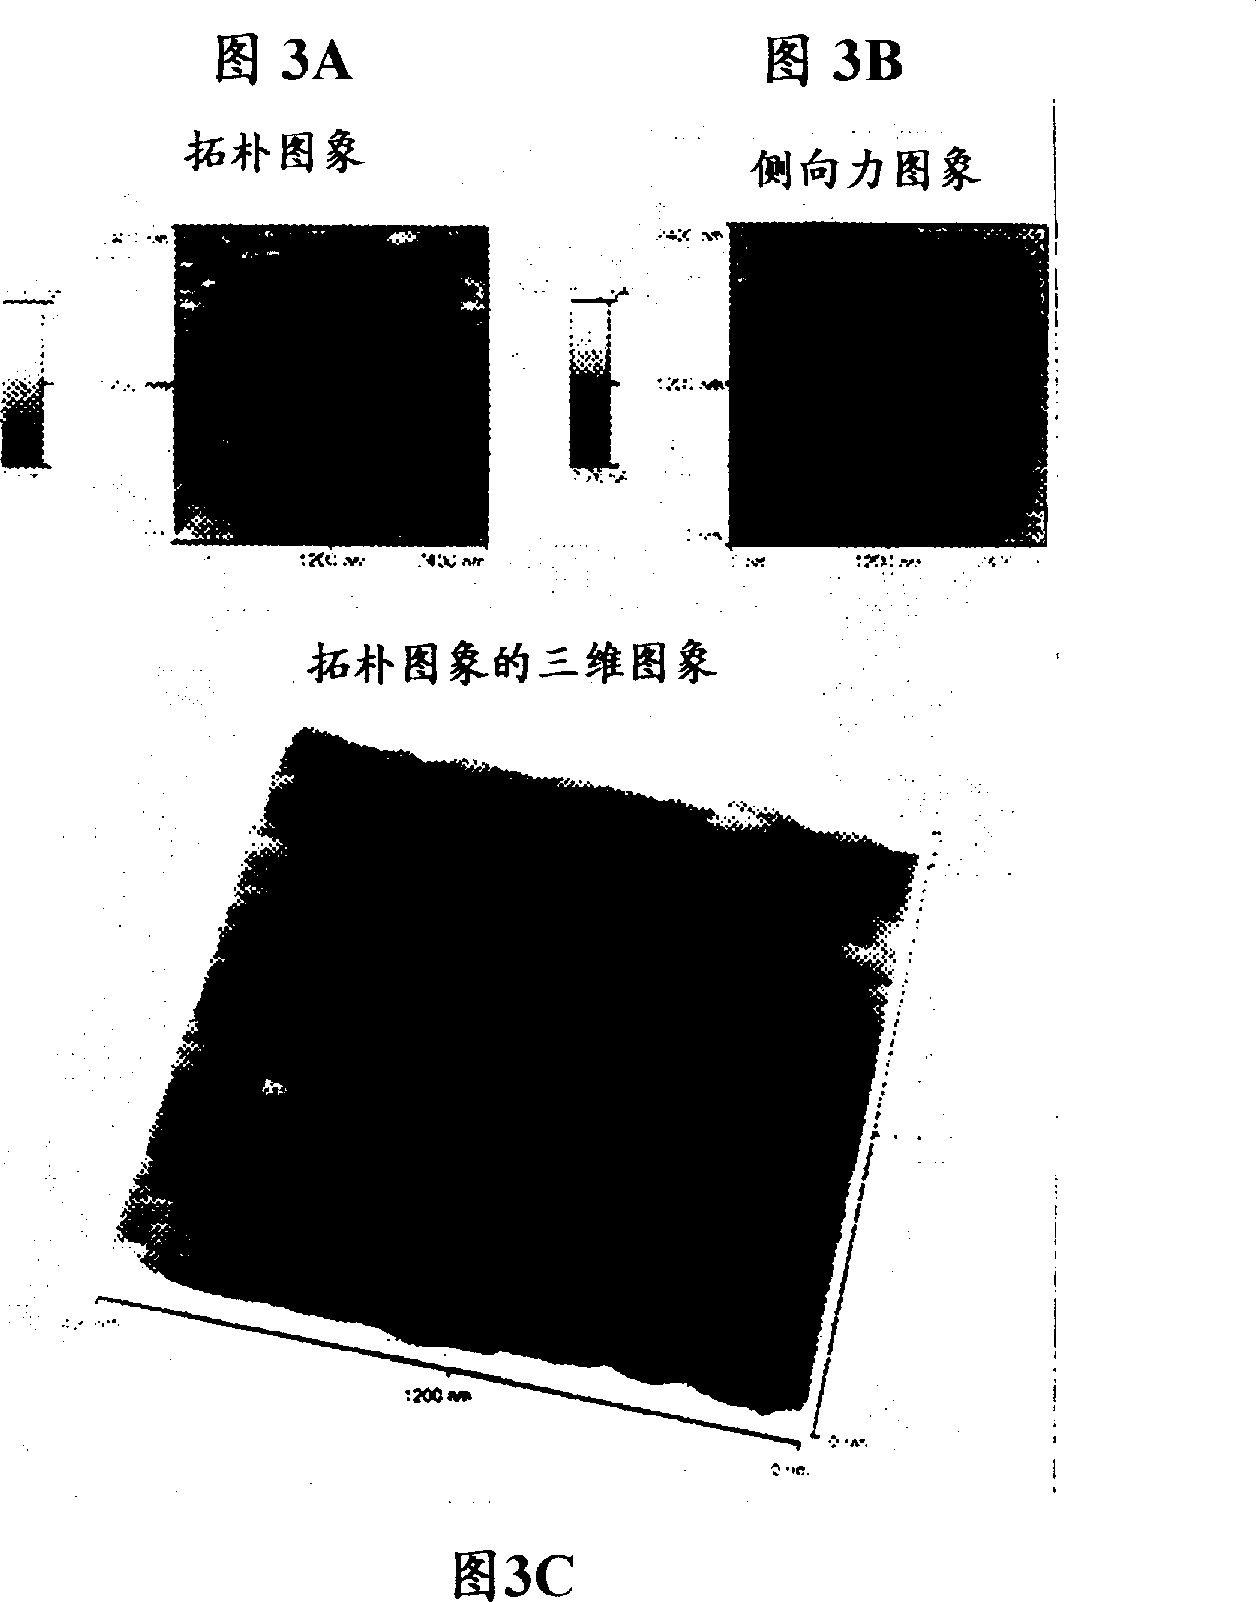 Method of contact printing on gold coated films